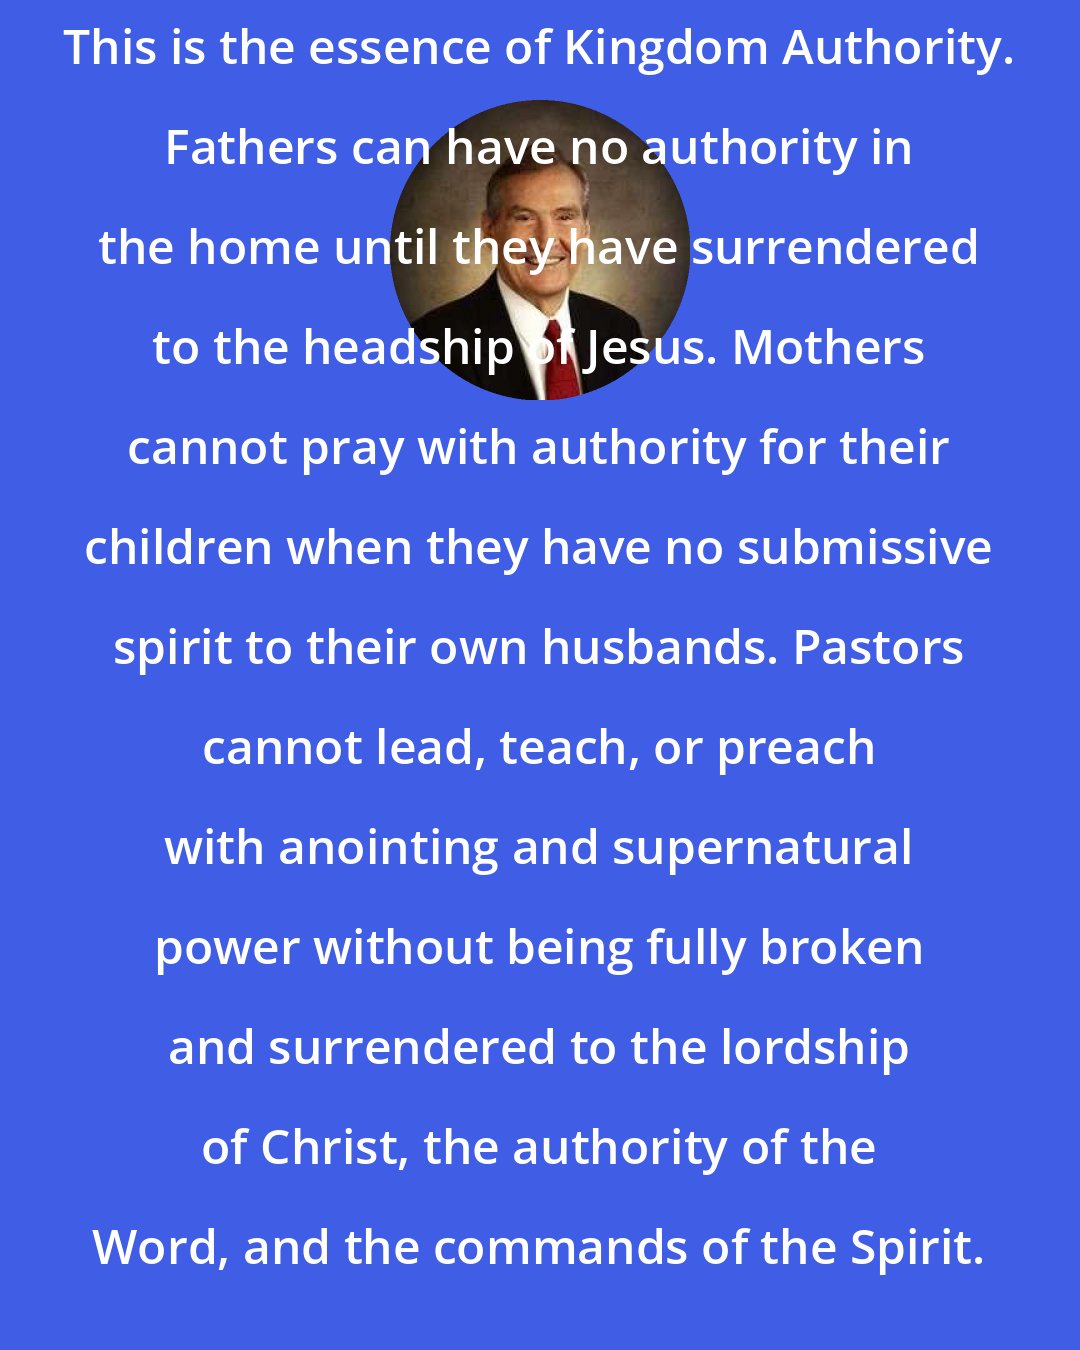 Adrian Rogers: This is the essence of Kingdom Authority. Fathers can have no authority in the home until they have surrendered to the headship of Jesus. Mothers cannot pray with authority for their children when they have no submissive spirit to their own husbands. Pastors cannot lead, teach, or preach with anointing and supernatural power without being fully broken and surrendered to the lordship of Christ, the authority of the Word, and the commands of the Spirit.